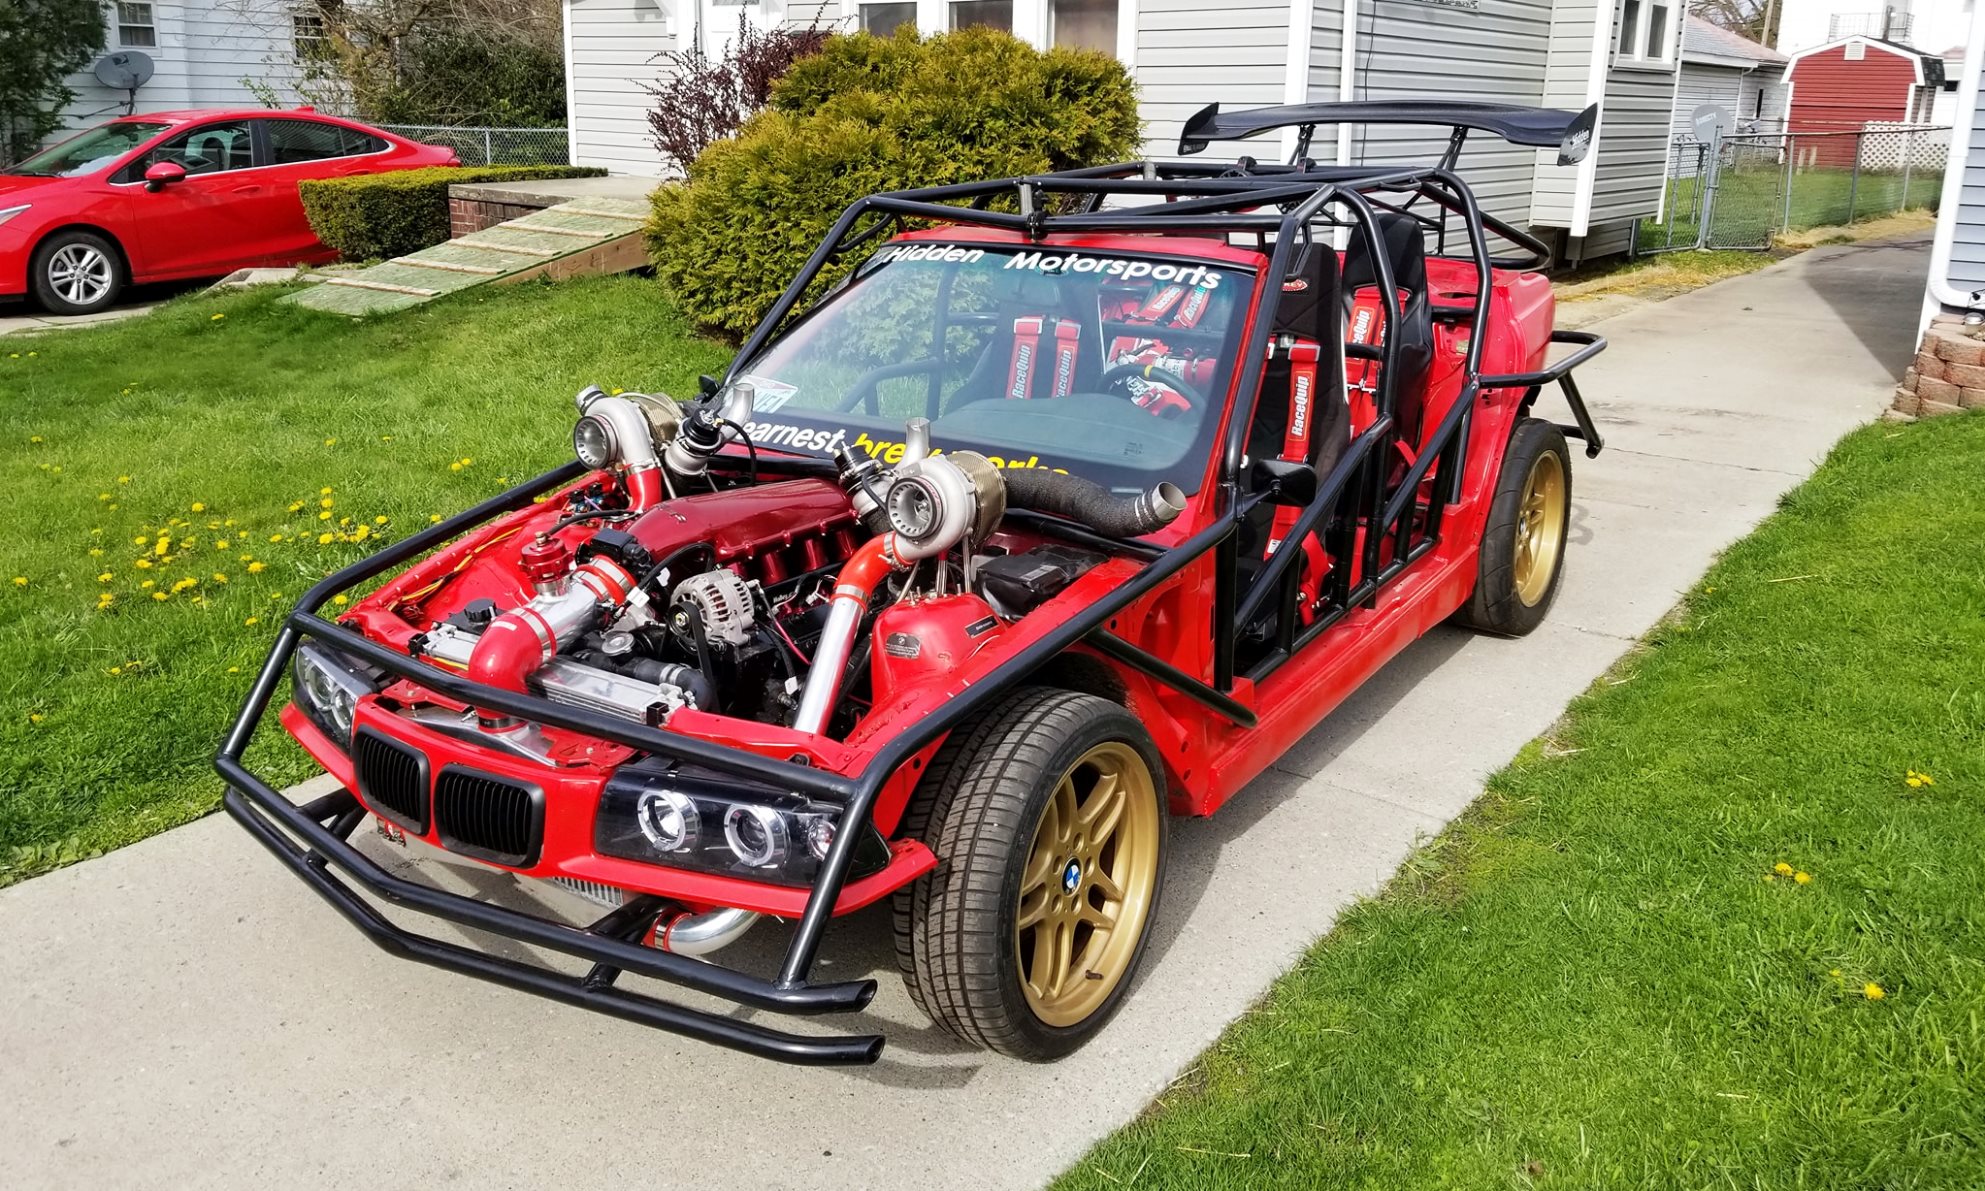 BMW drift kart is the craziest BMW you're likely to see.